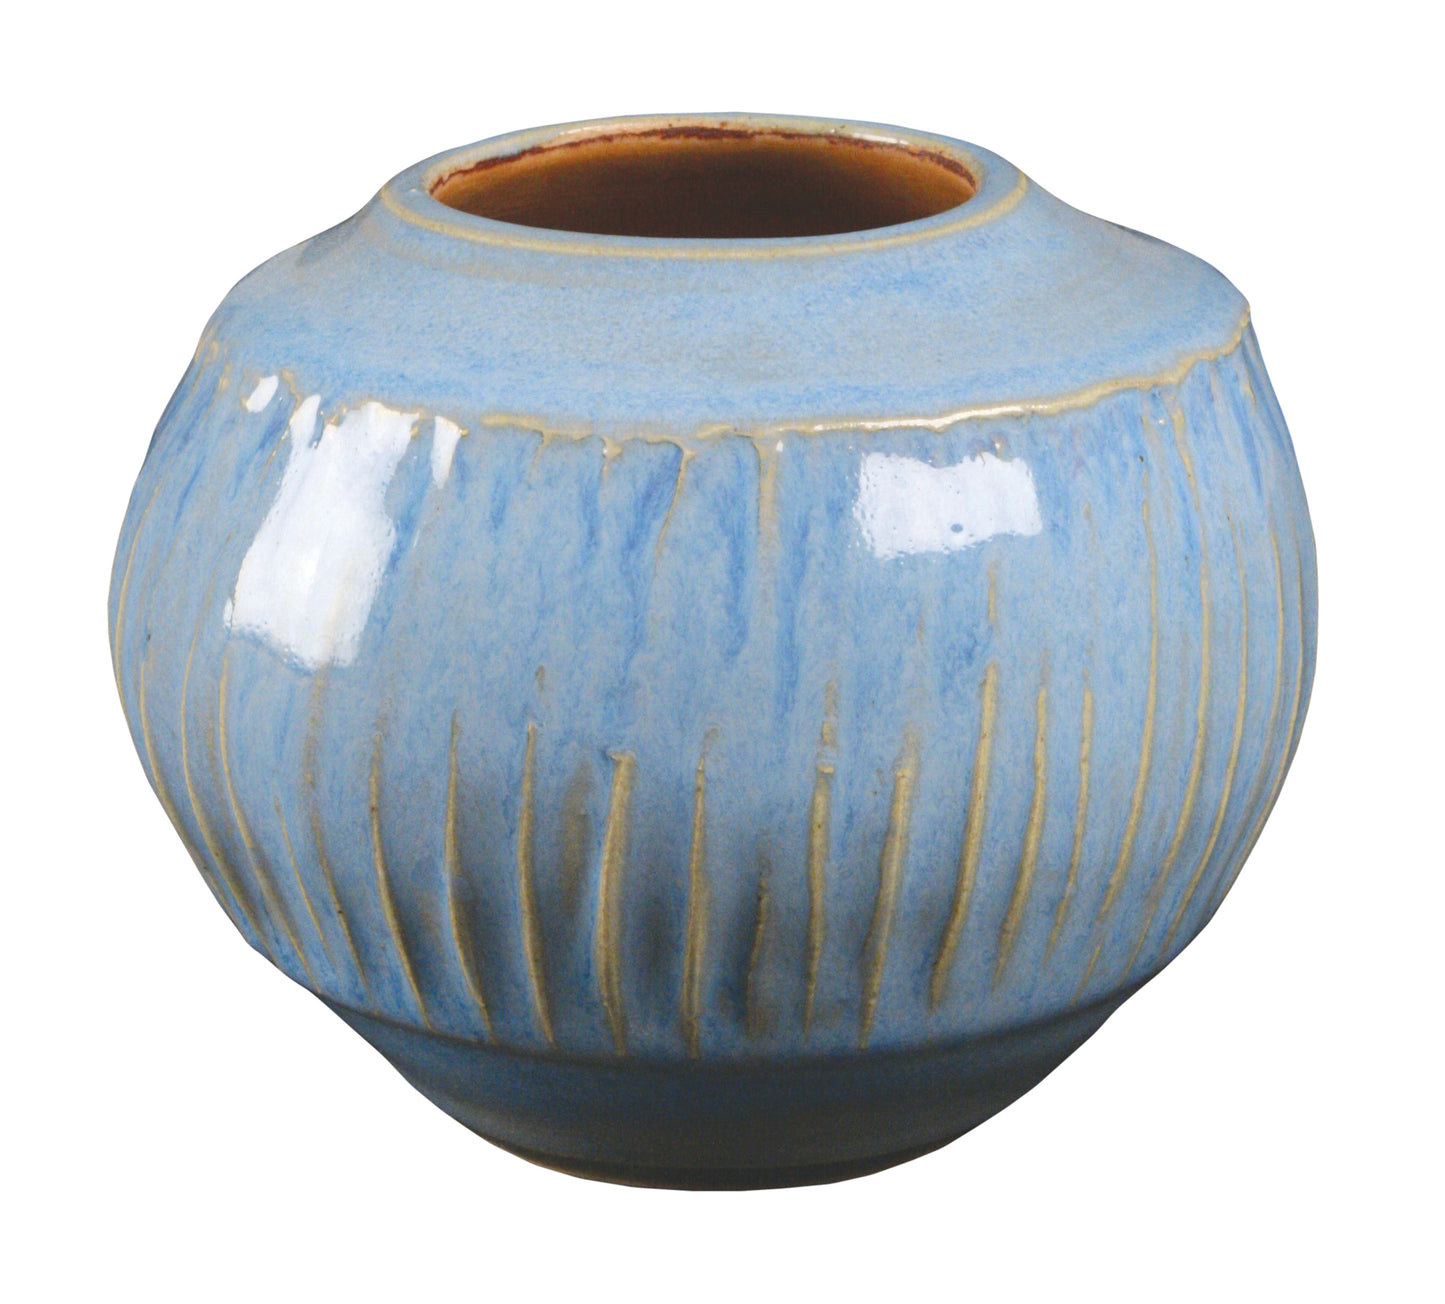 bigceramicstore-com,Amaco Potters Choice PC25 Textured Turquoise (CL)(O),Amaco,Glazes - Mid-fire